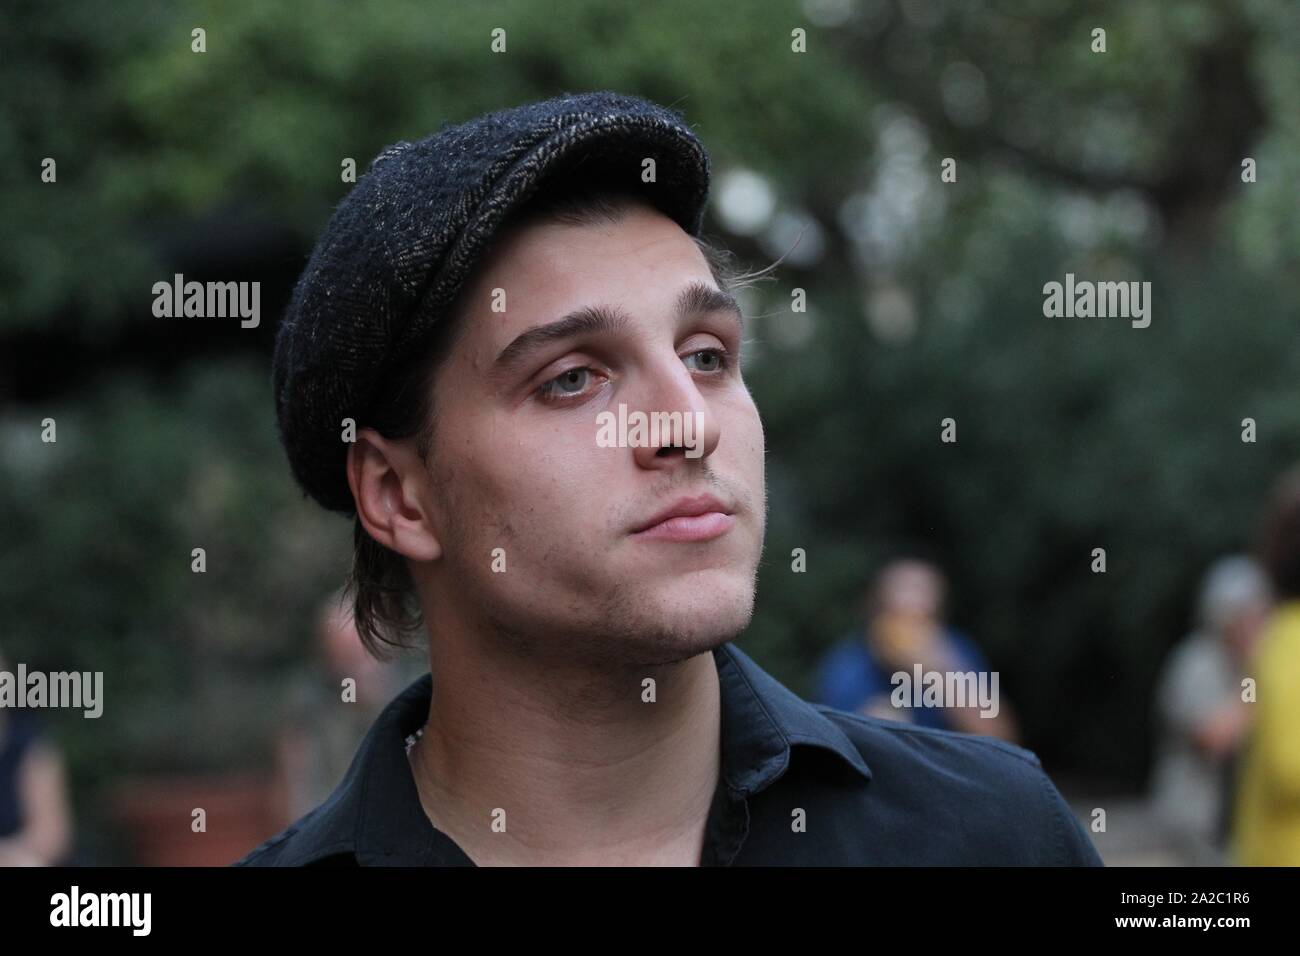 German actor JONAS DASSLER iin the center of Athens. Jonas Dassler visit Athens for the premiere of the move 'The Golden Glove' (Der Goldene Handschuh) during The 25th Athens International Film Festival. Stock Photo